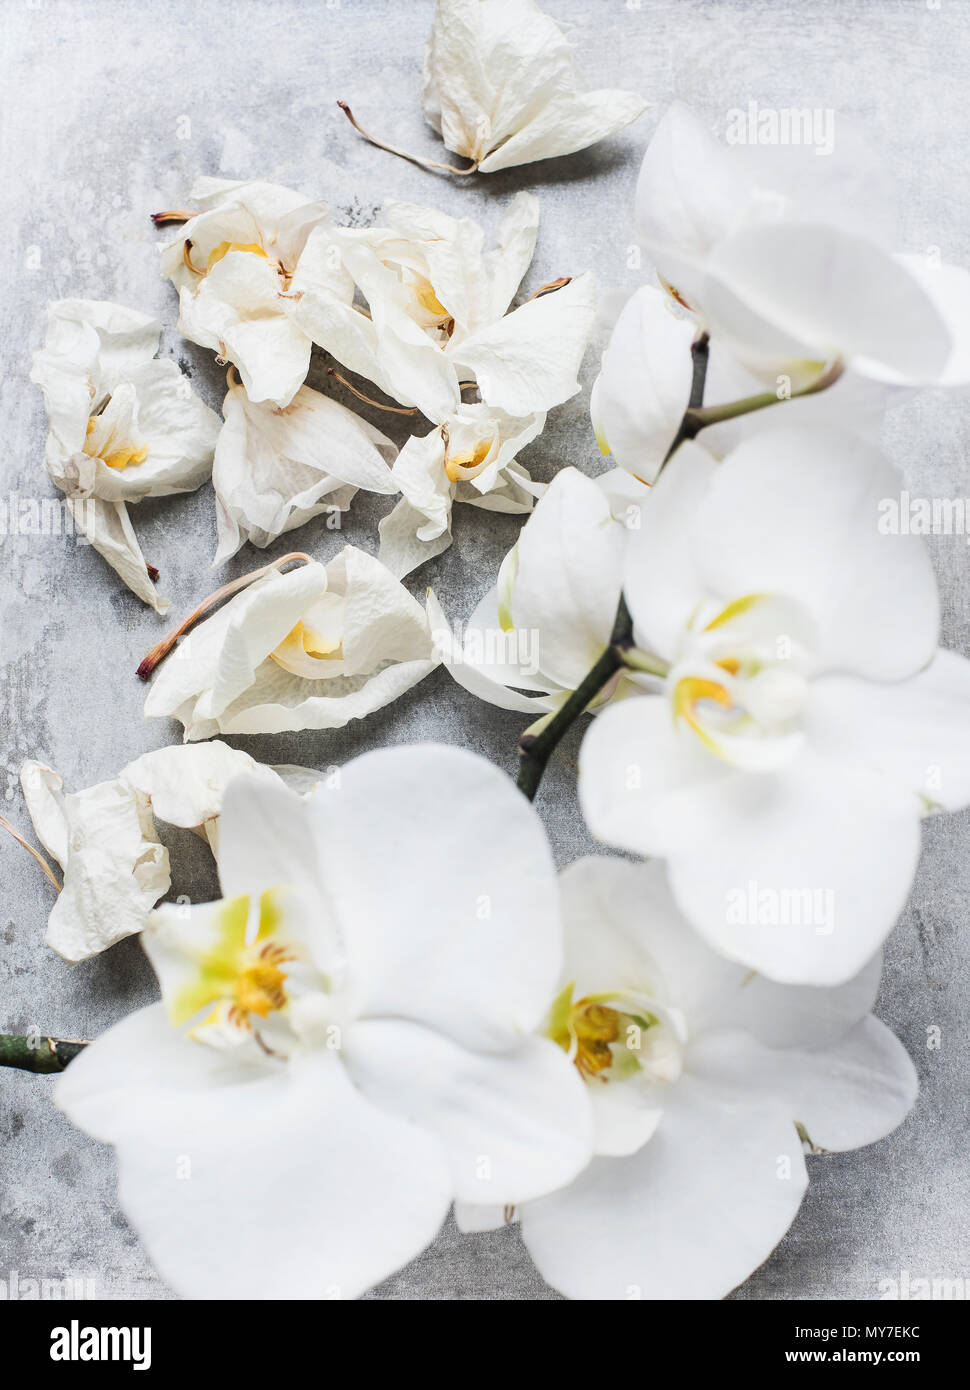 White orchid flowers, close up overhead view Stock Photo